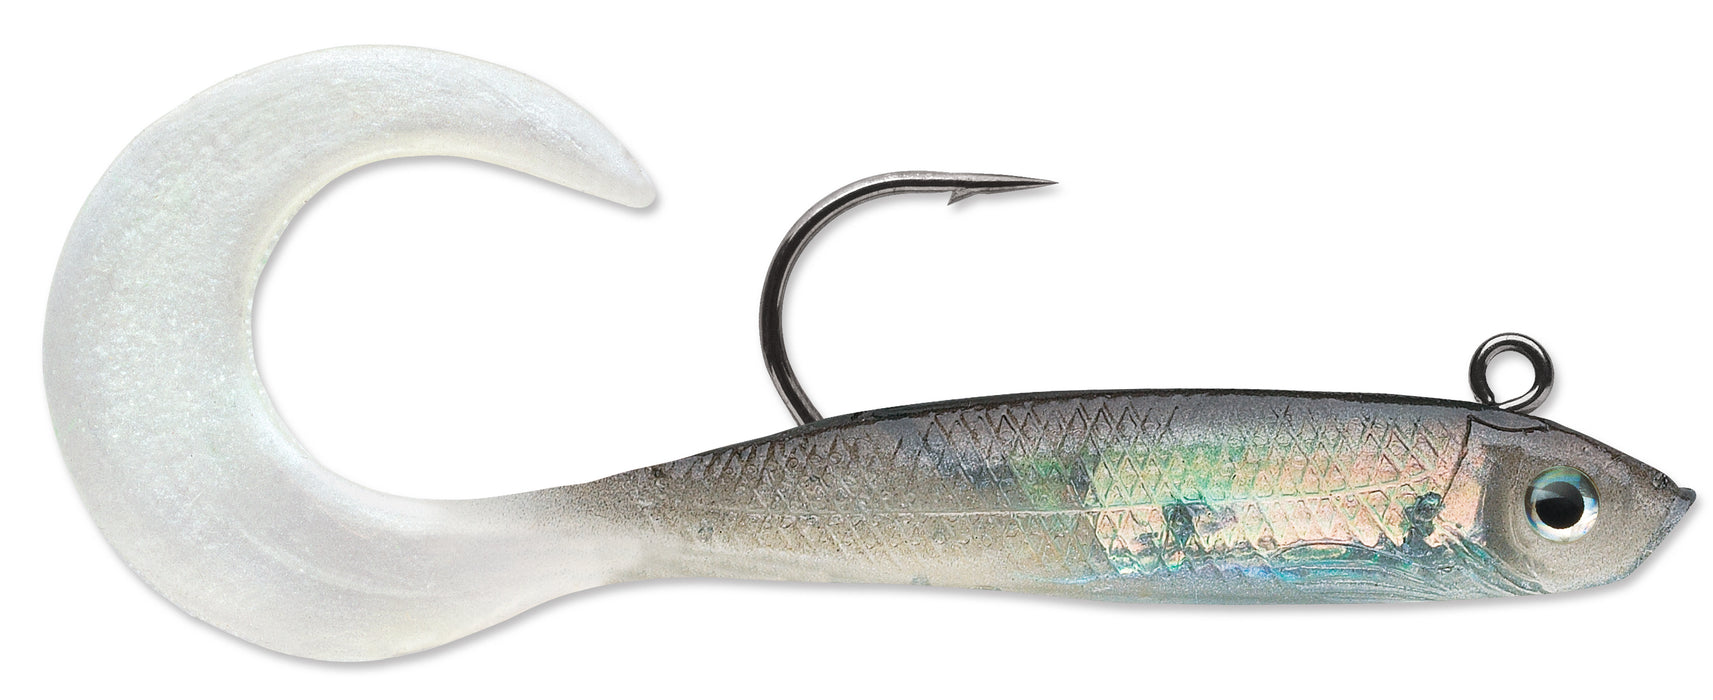  Large Choice Storm WildEye Curl Tail Minnow Swimbait  3 pack Sales Up 62%